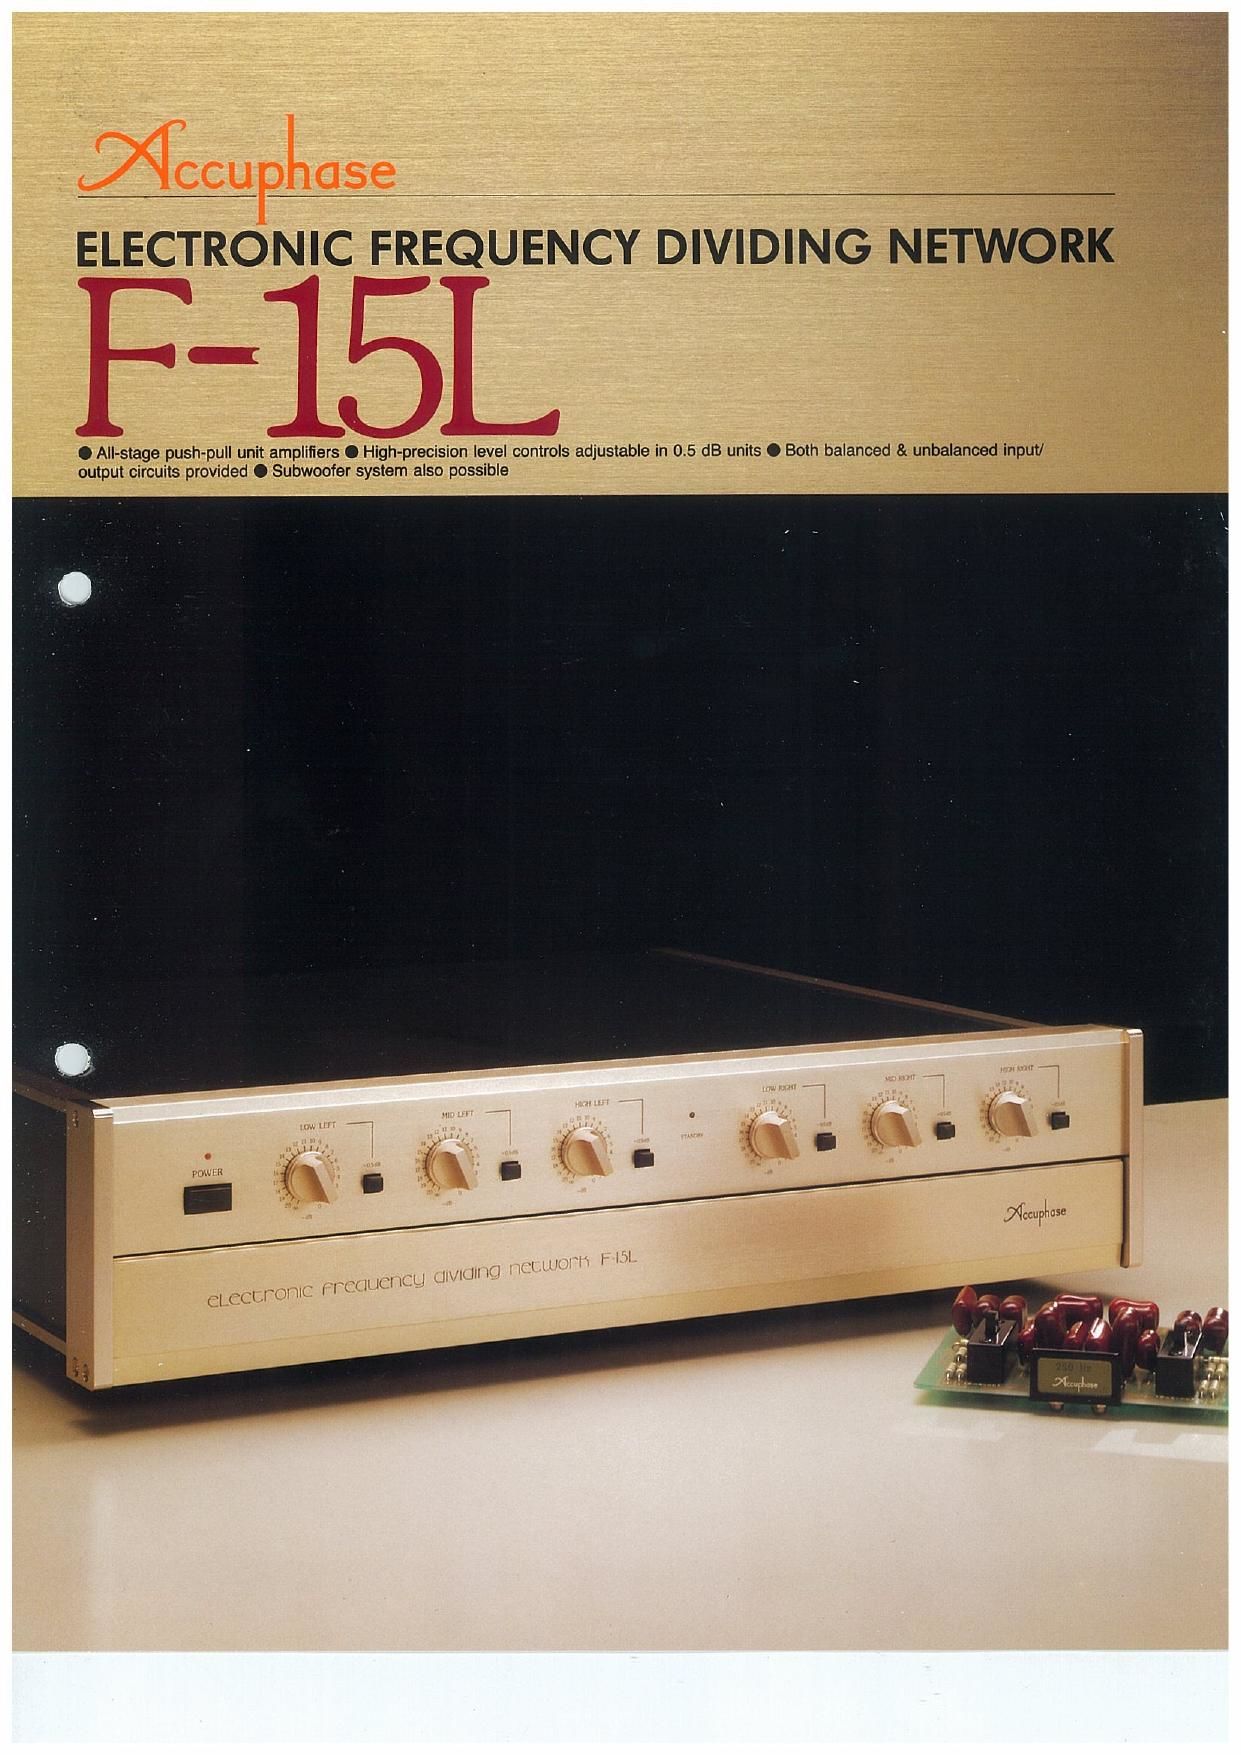 Accuphase F 15 L Brochure